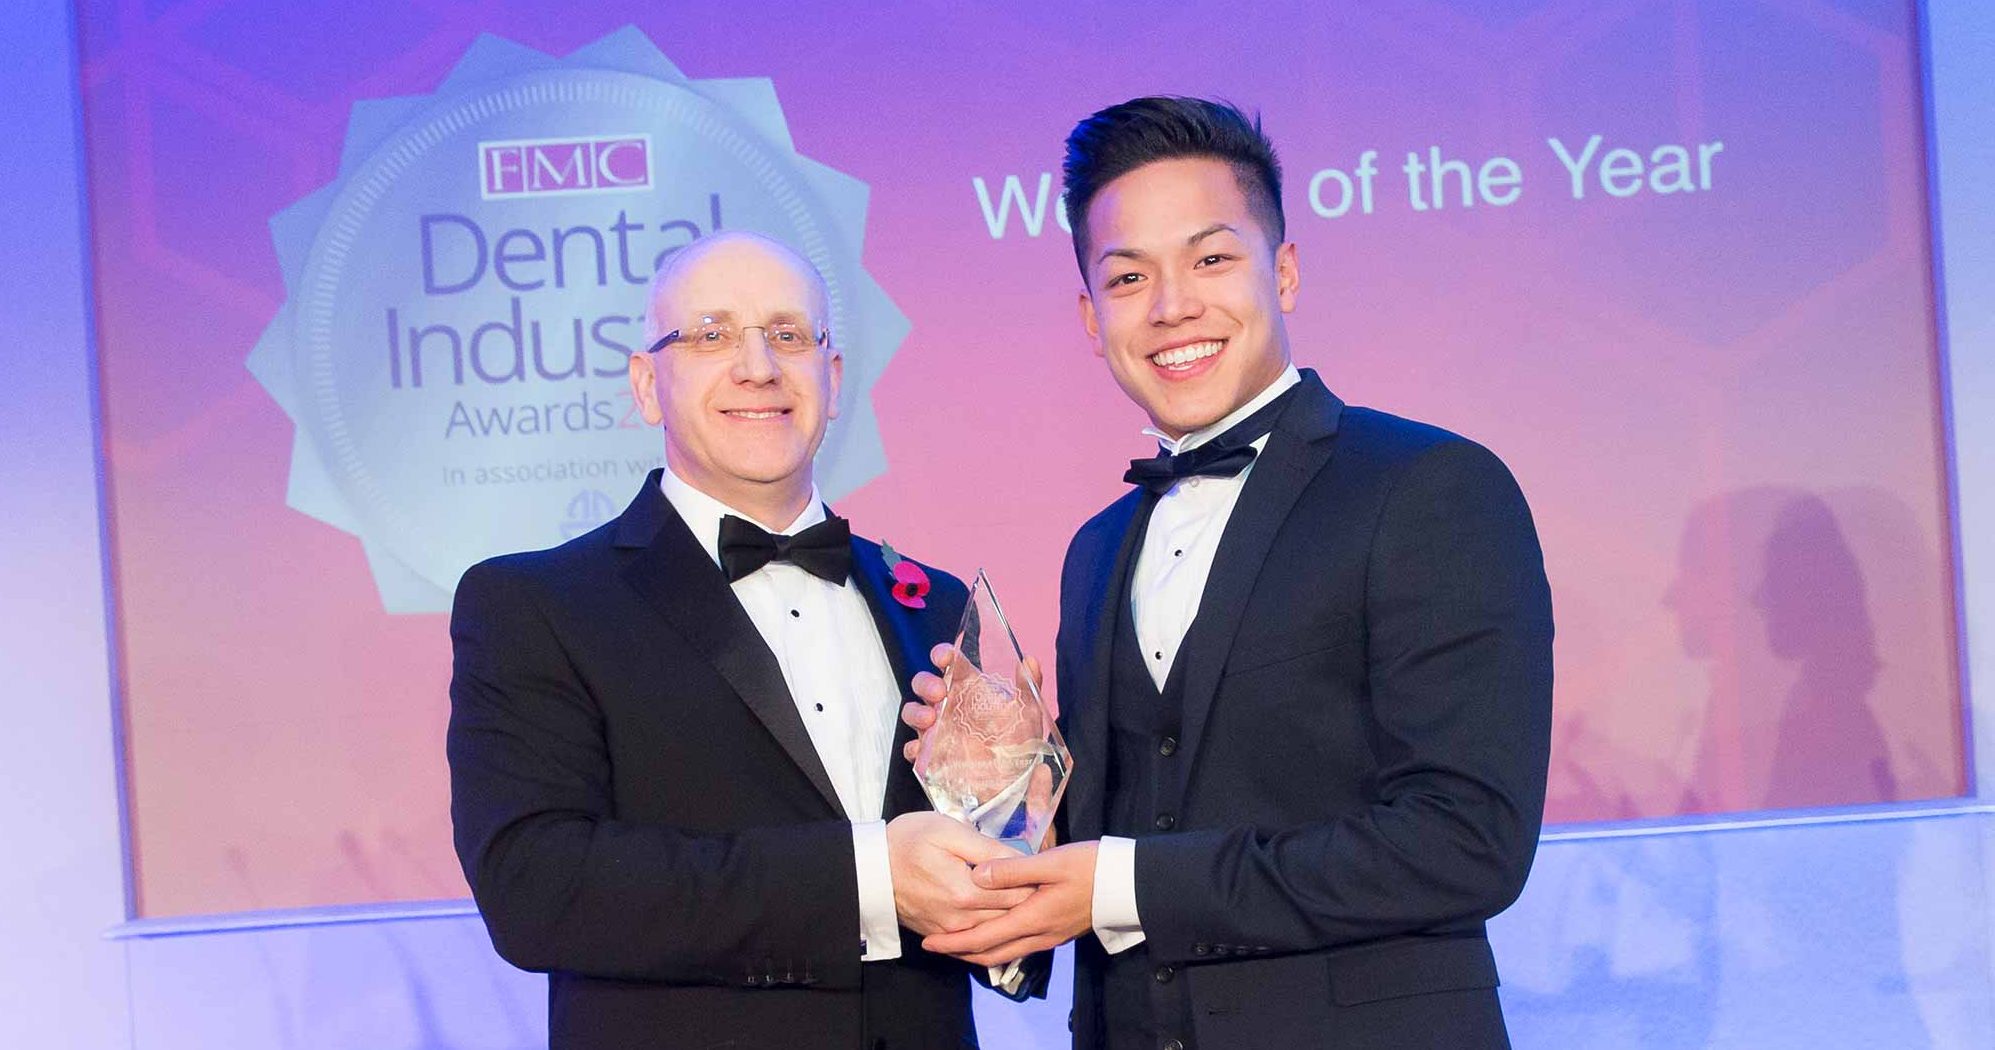 Dental Industry Awards 2019 Website of the Year